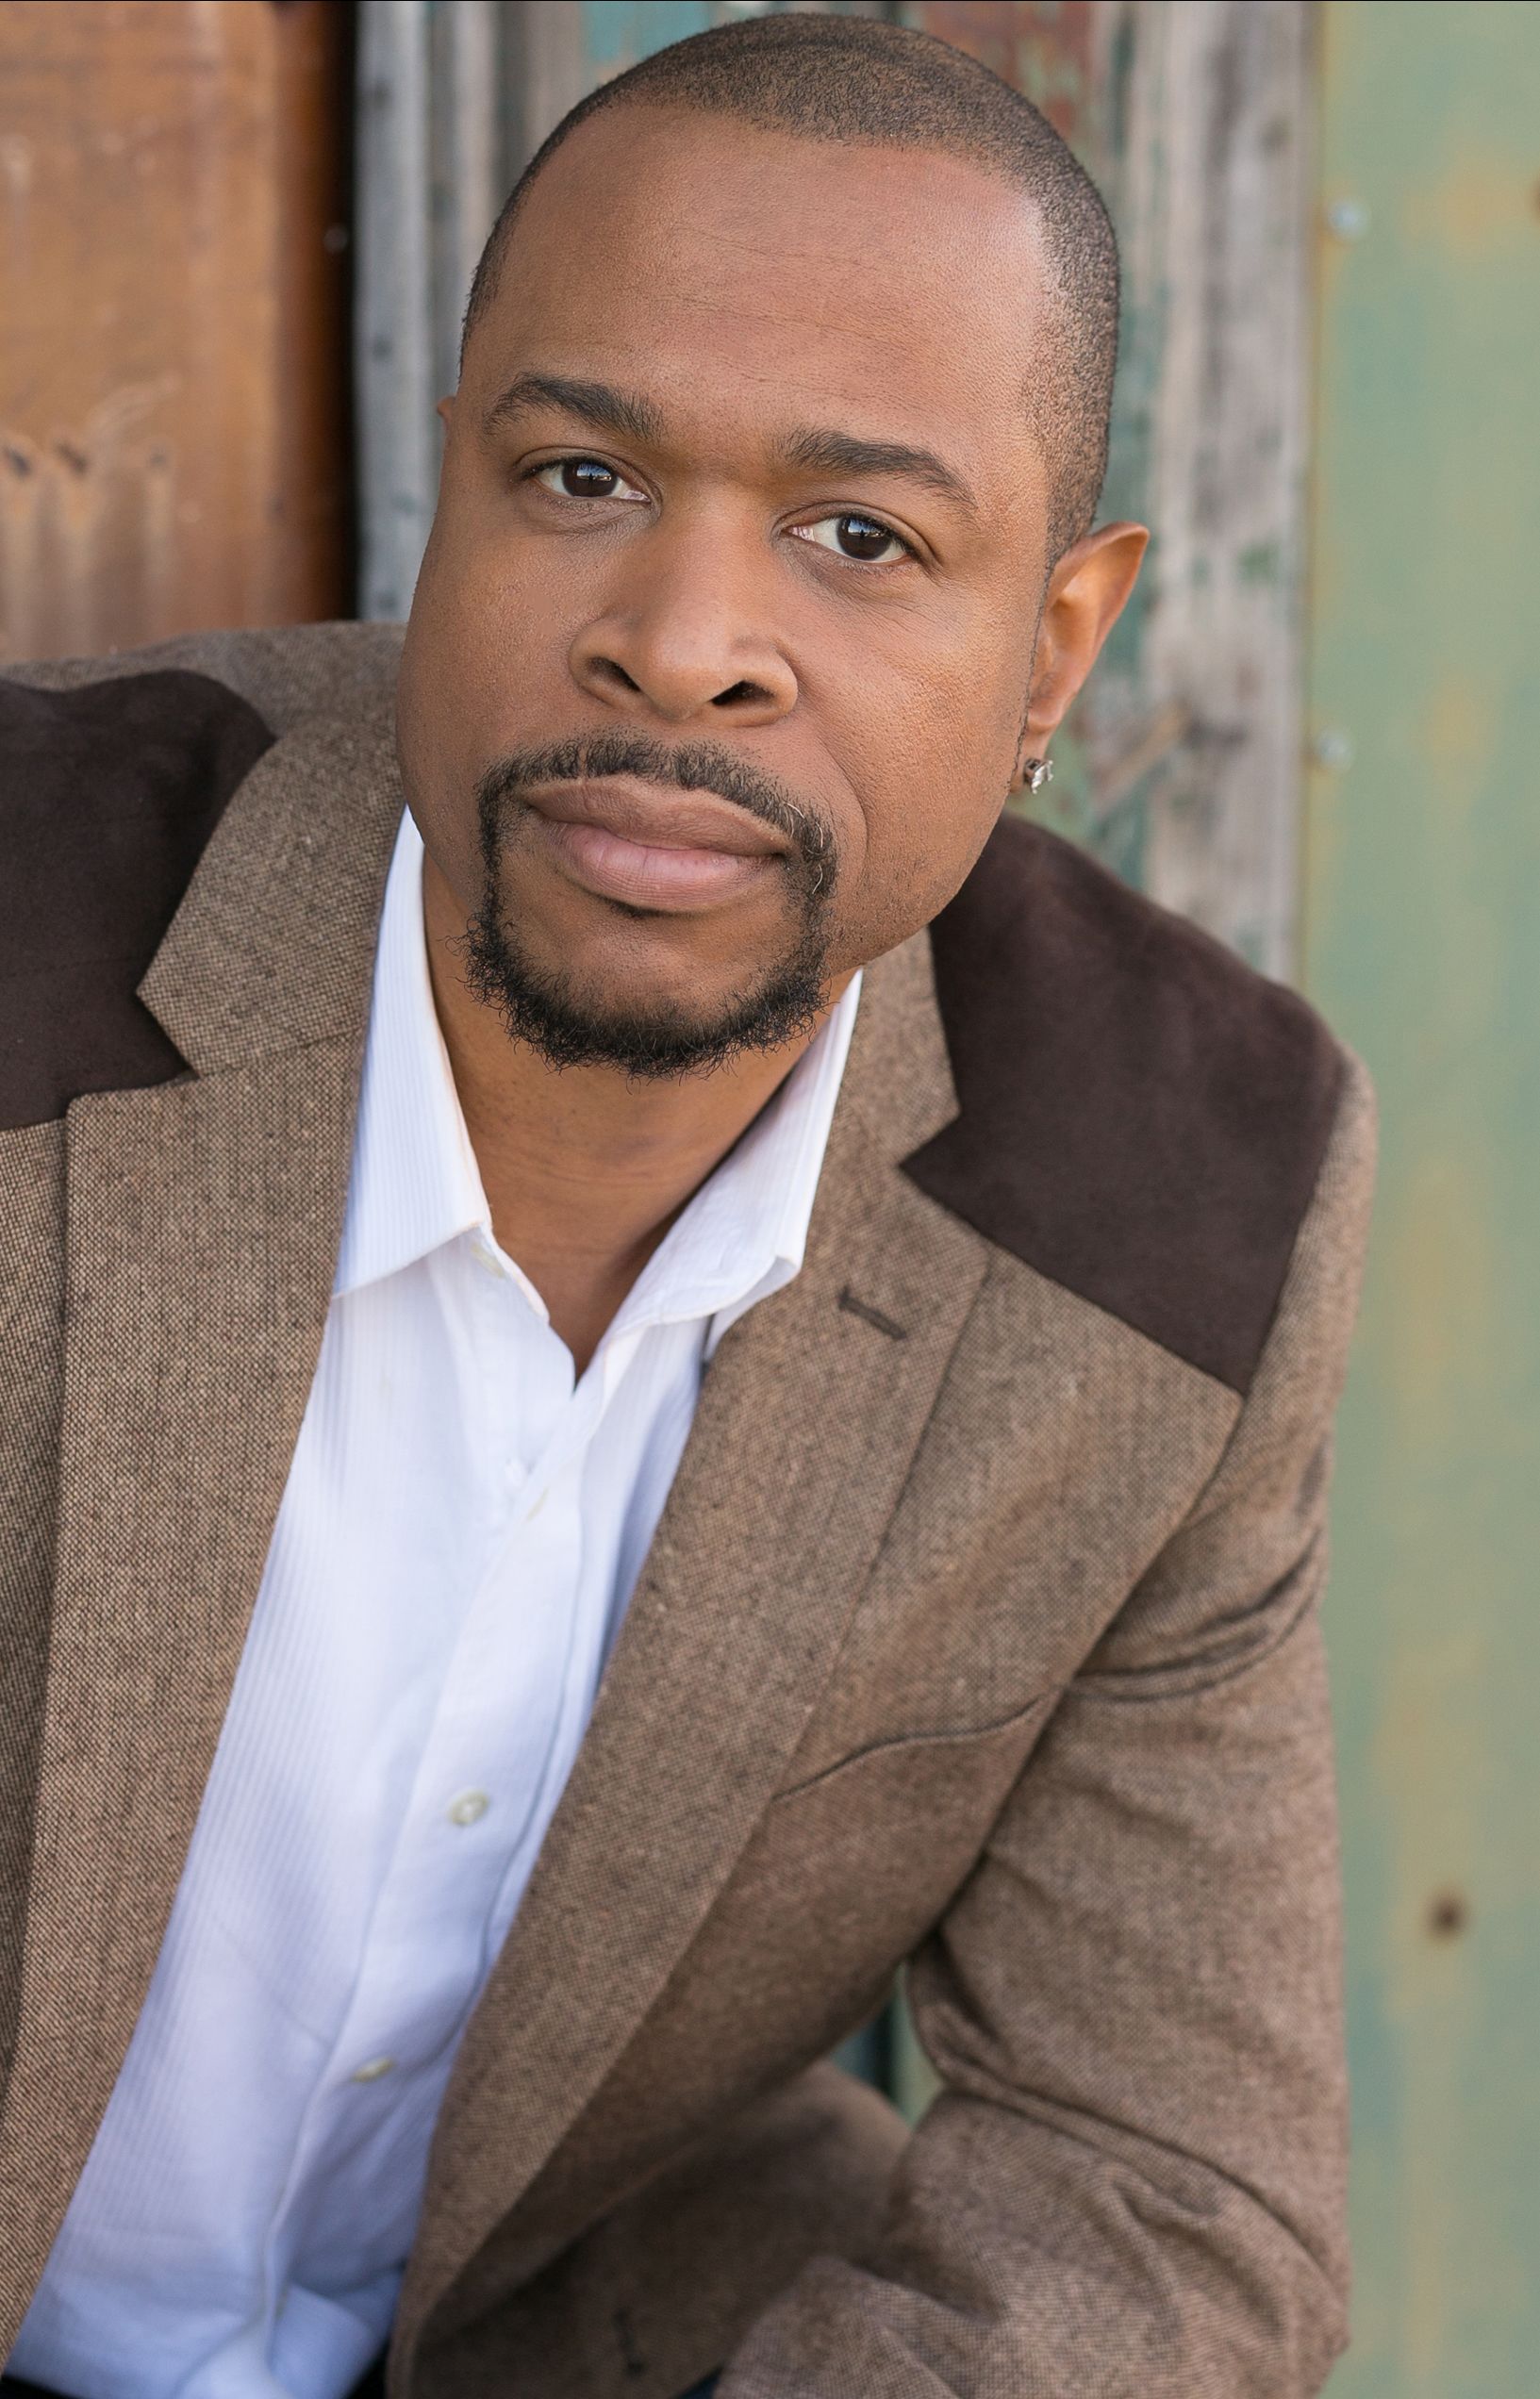 A Black man with a goatee wearing a white button-up shirt and two-toned brown blazer looks into the camera and smirks